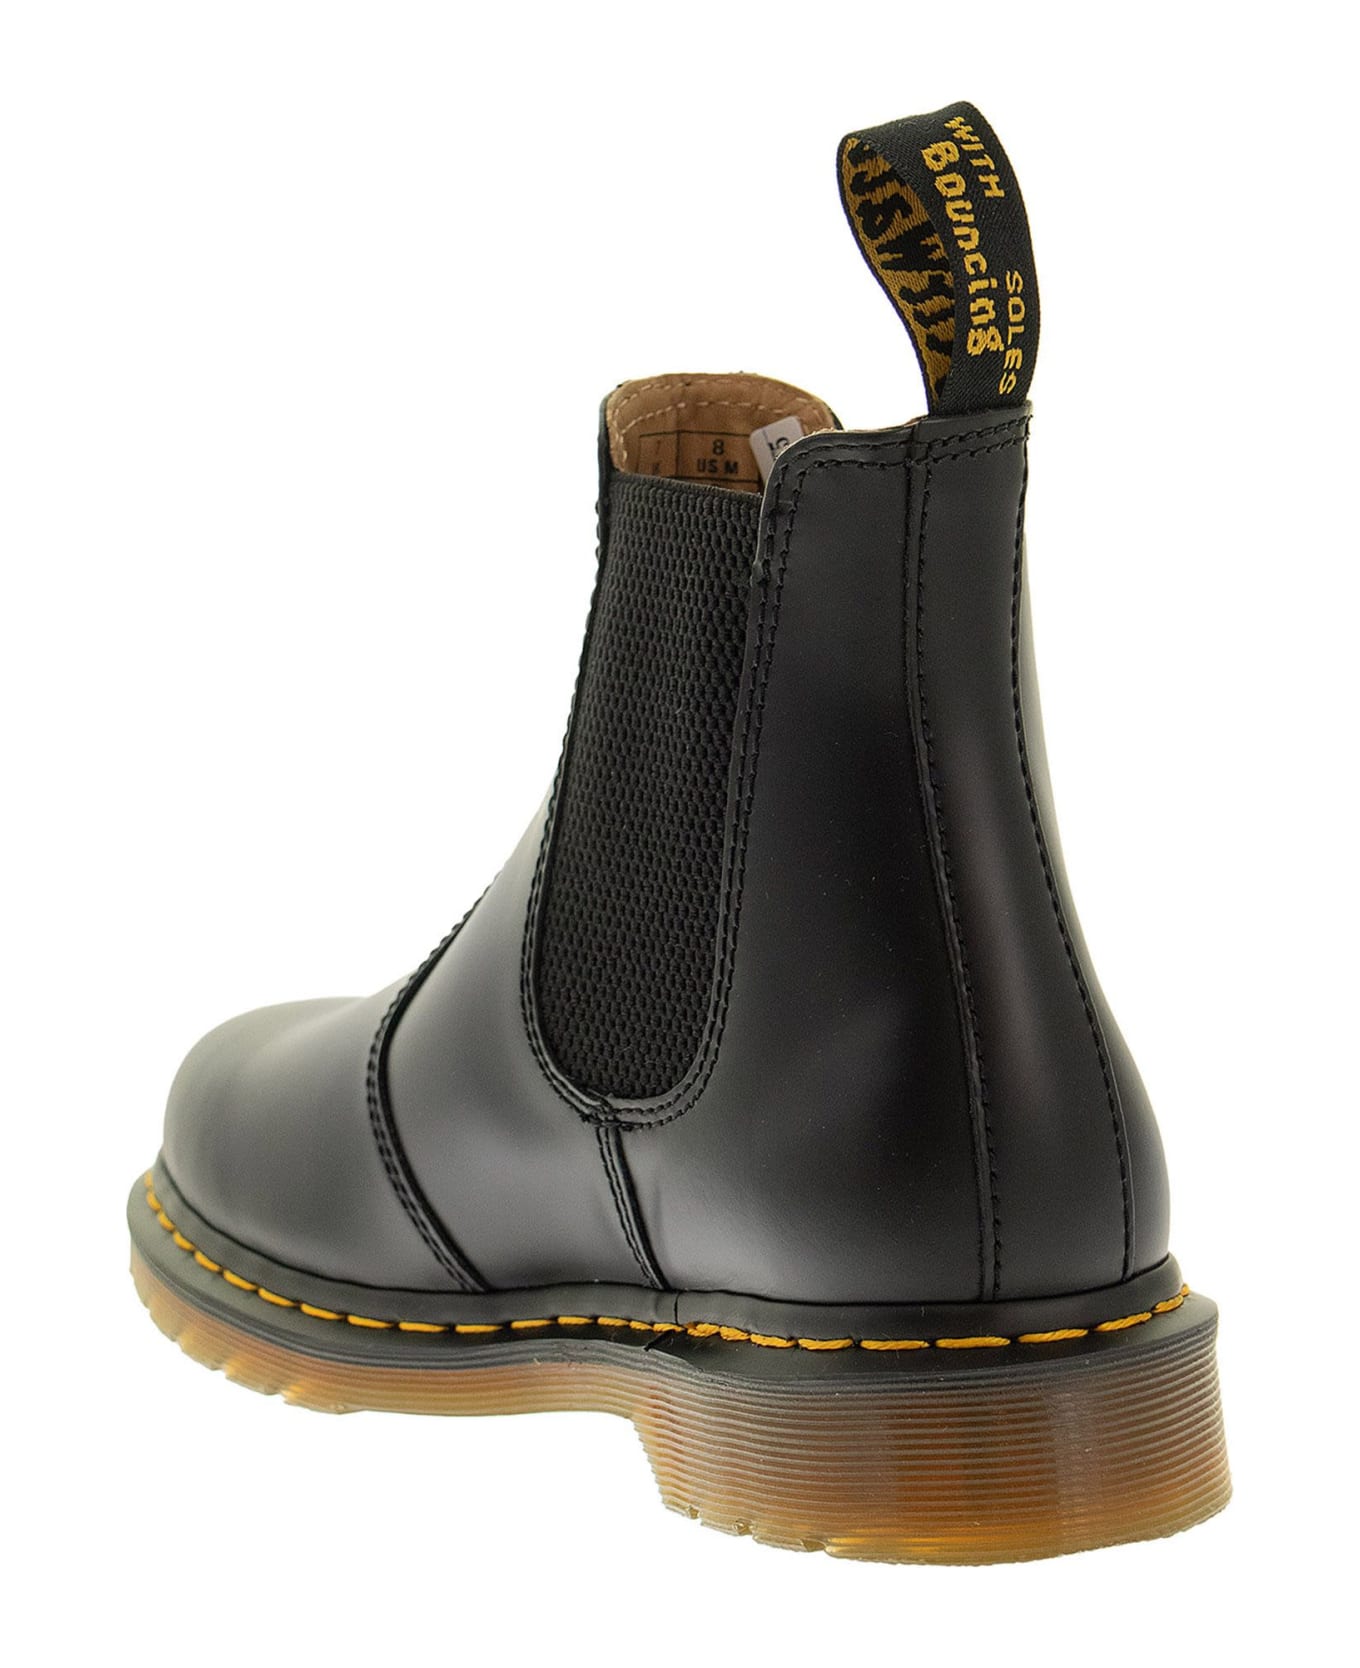 Dr. Martens 2976 Smooth Leather Chelsea Boots - Black